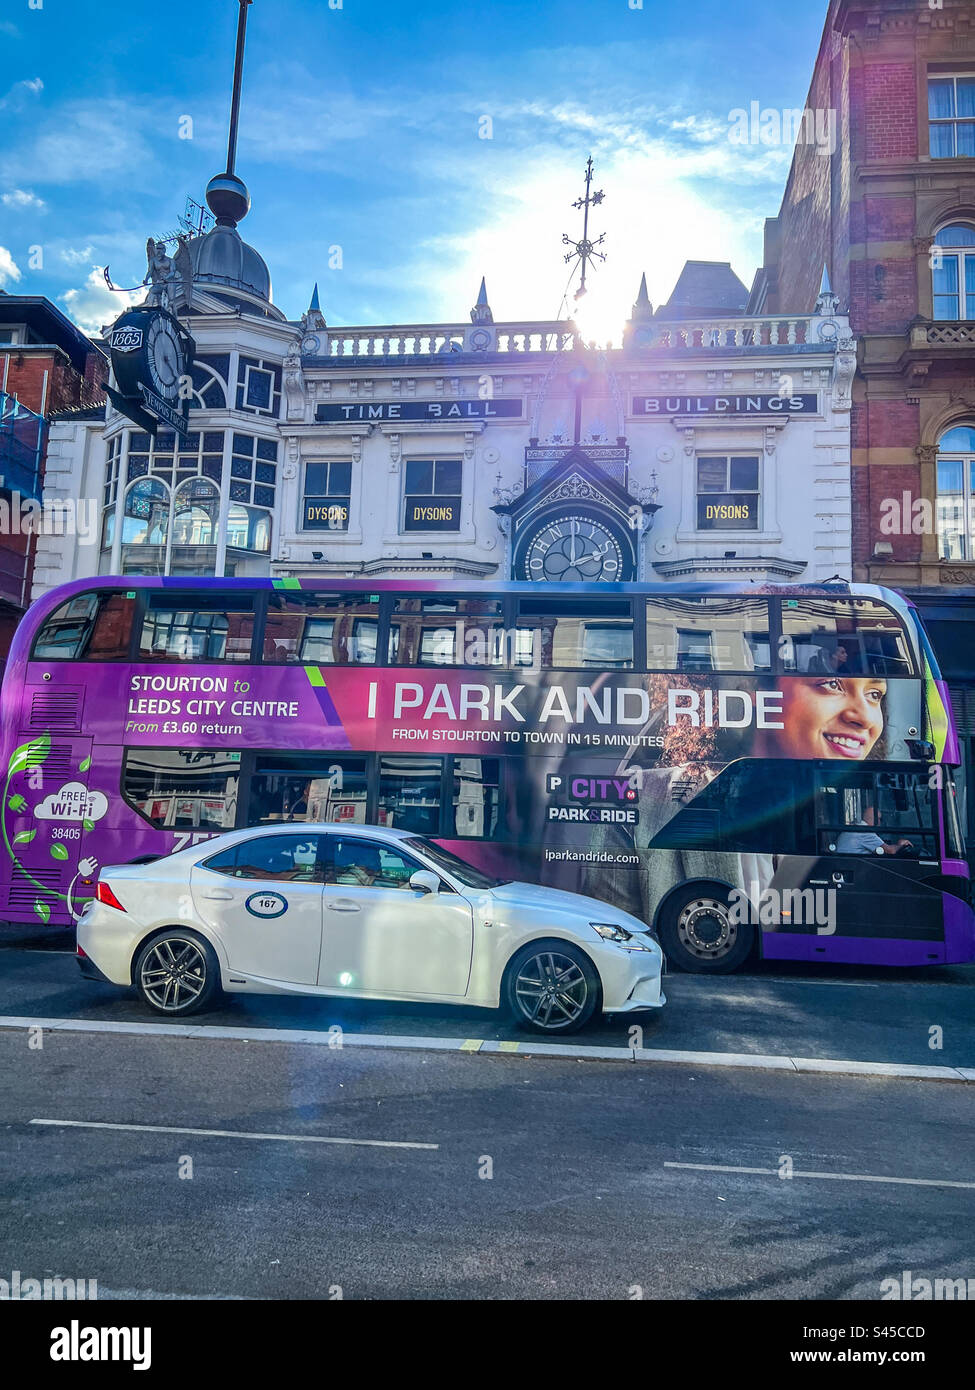 Private hire taxi and bus on Briggate next to the Time Ball buildings in Leeds City Centre Stock Photo